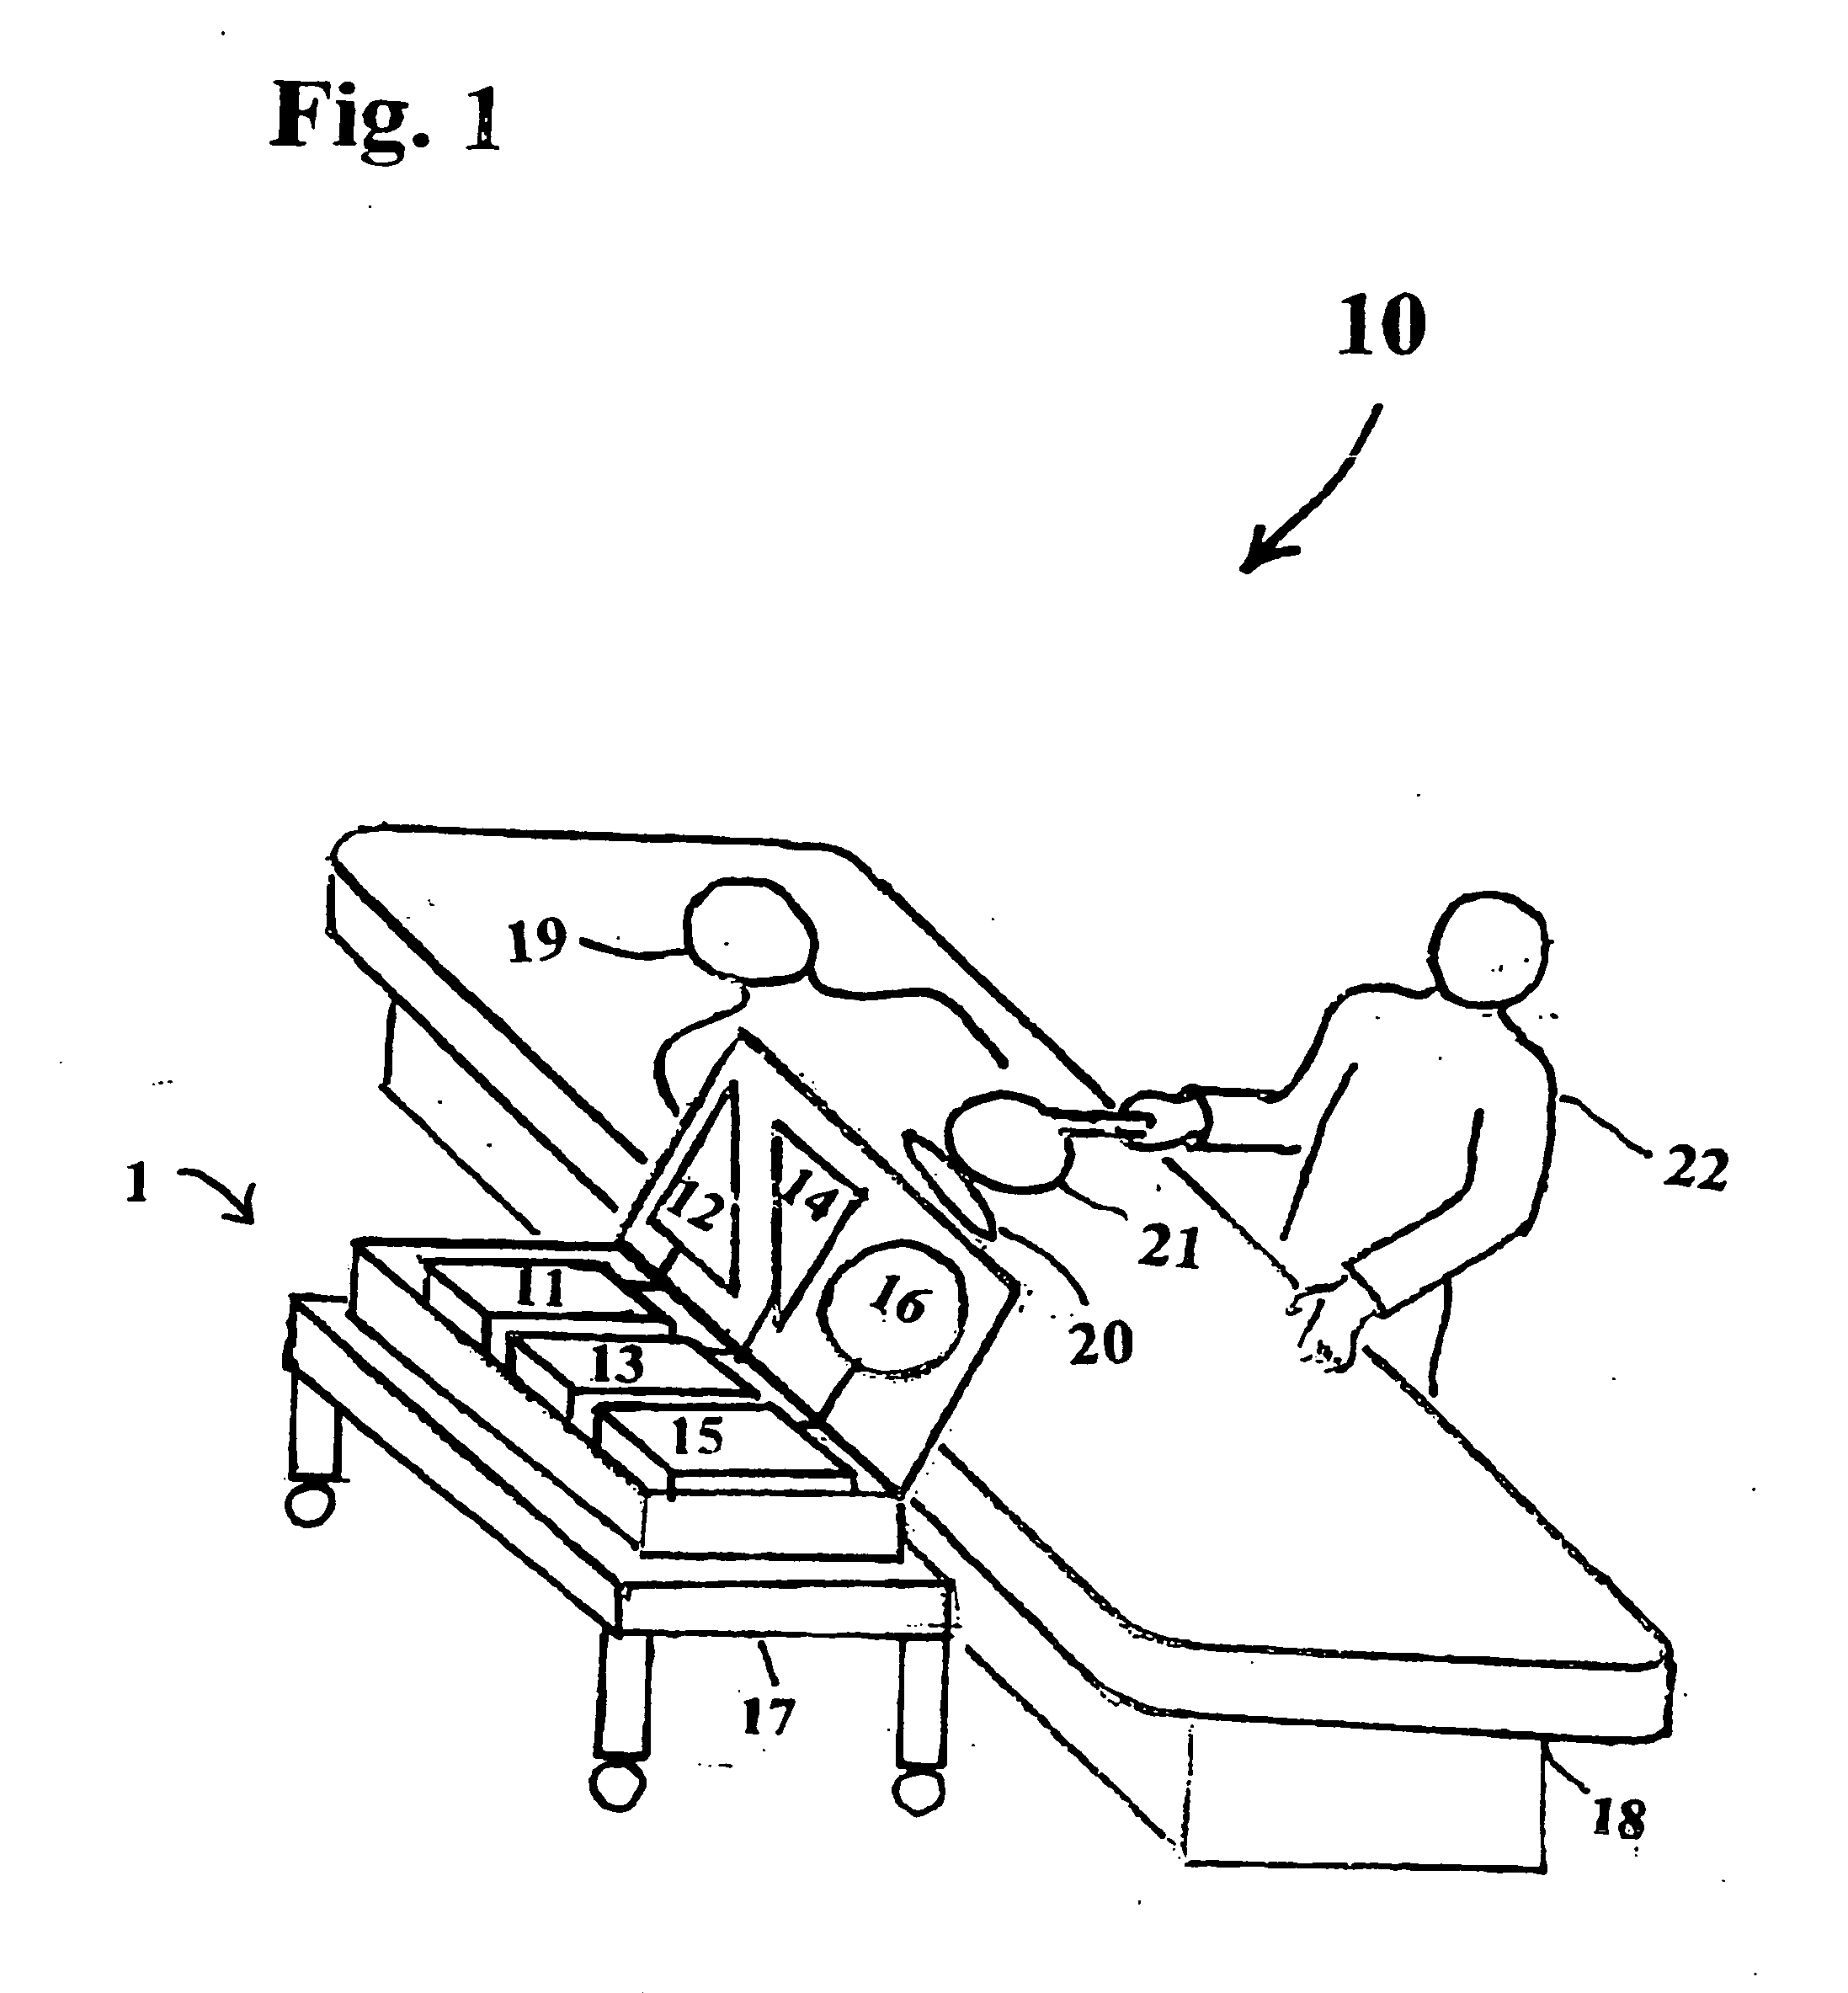 Multiplex system for the detection of surgical implements within the wound cavity